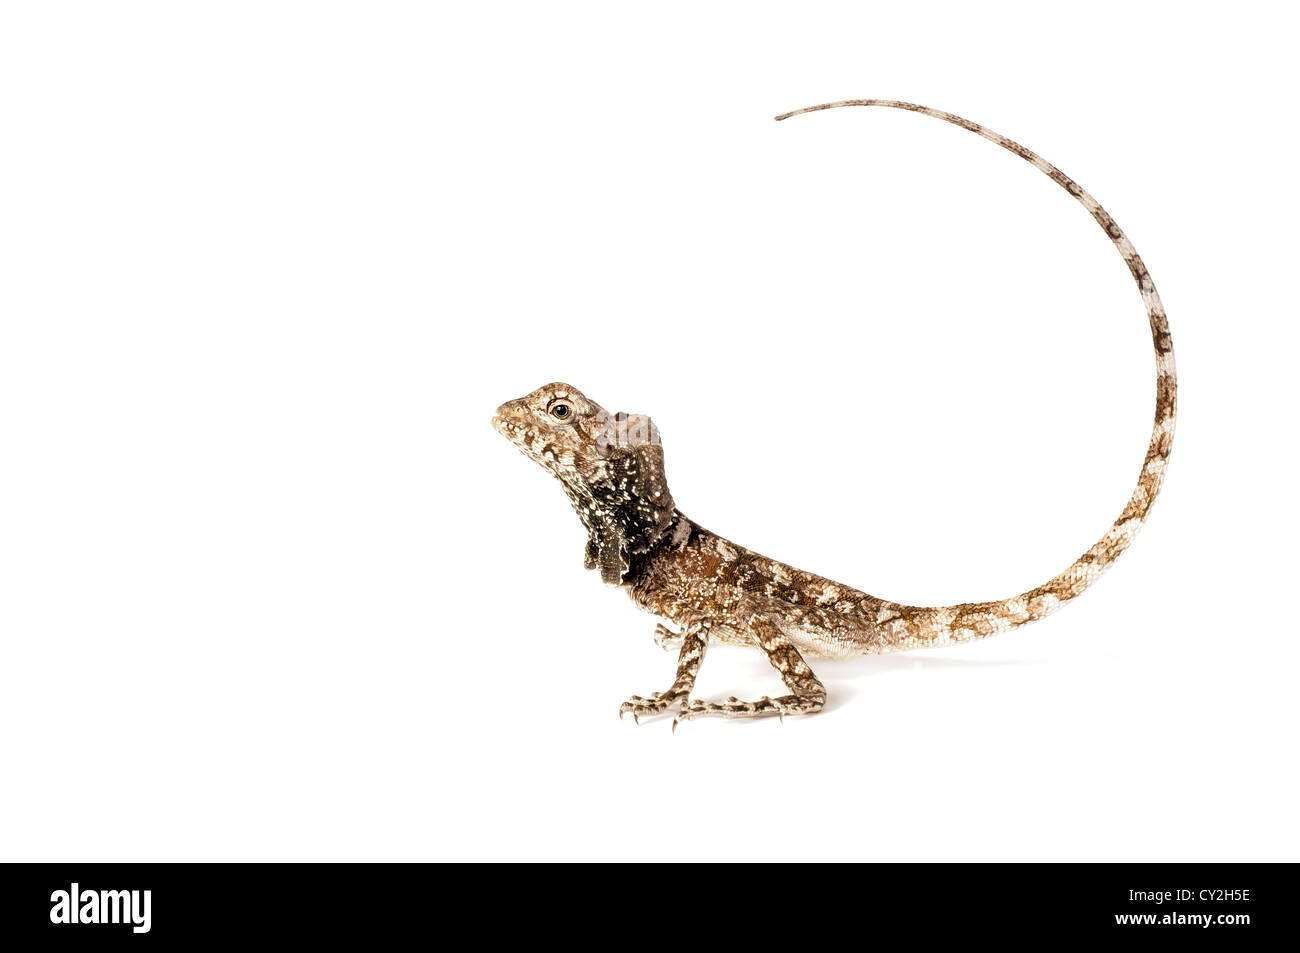 Frilled Dragon on a white background. Stock Photo